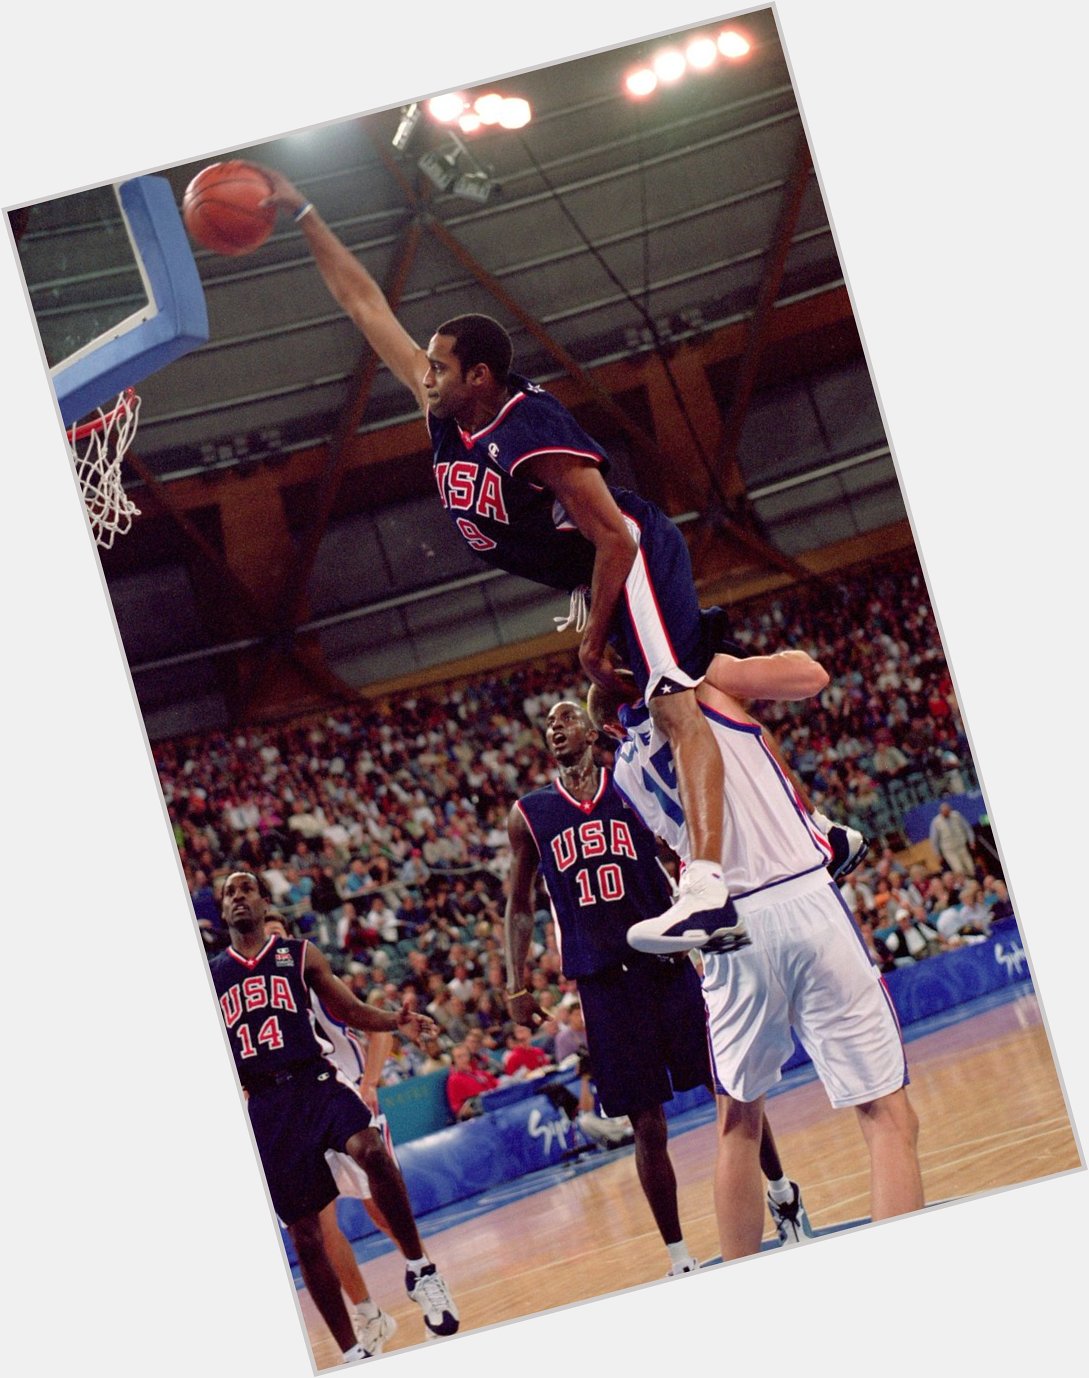 This will forever be my favorite Vince Carter dunk. Happy Birthday! 